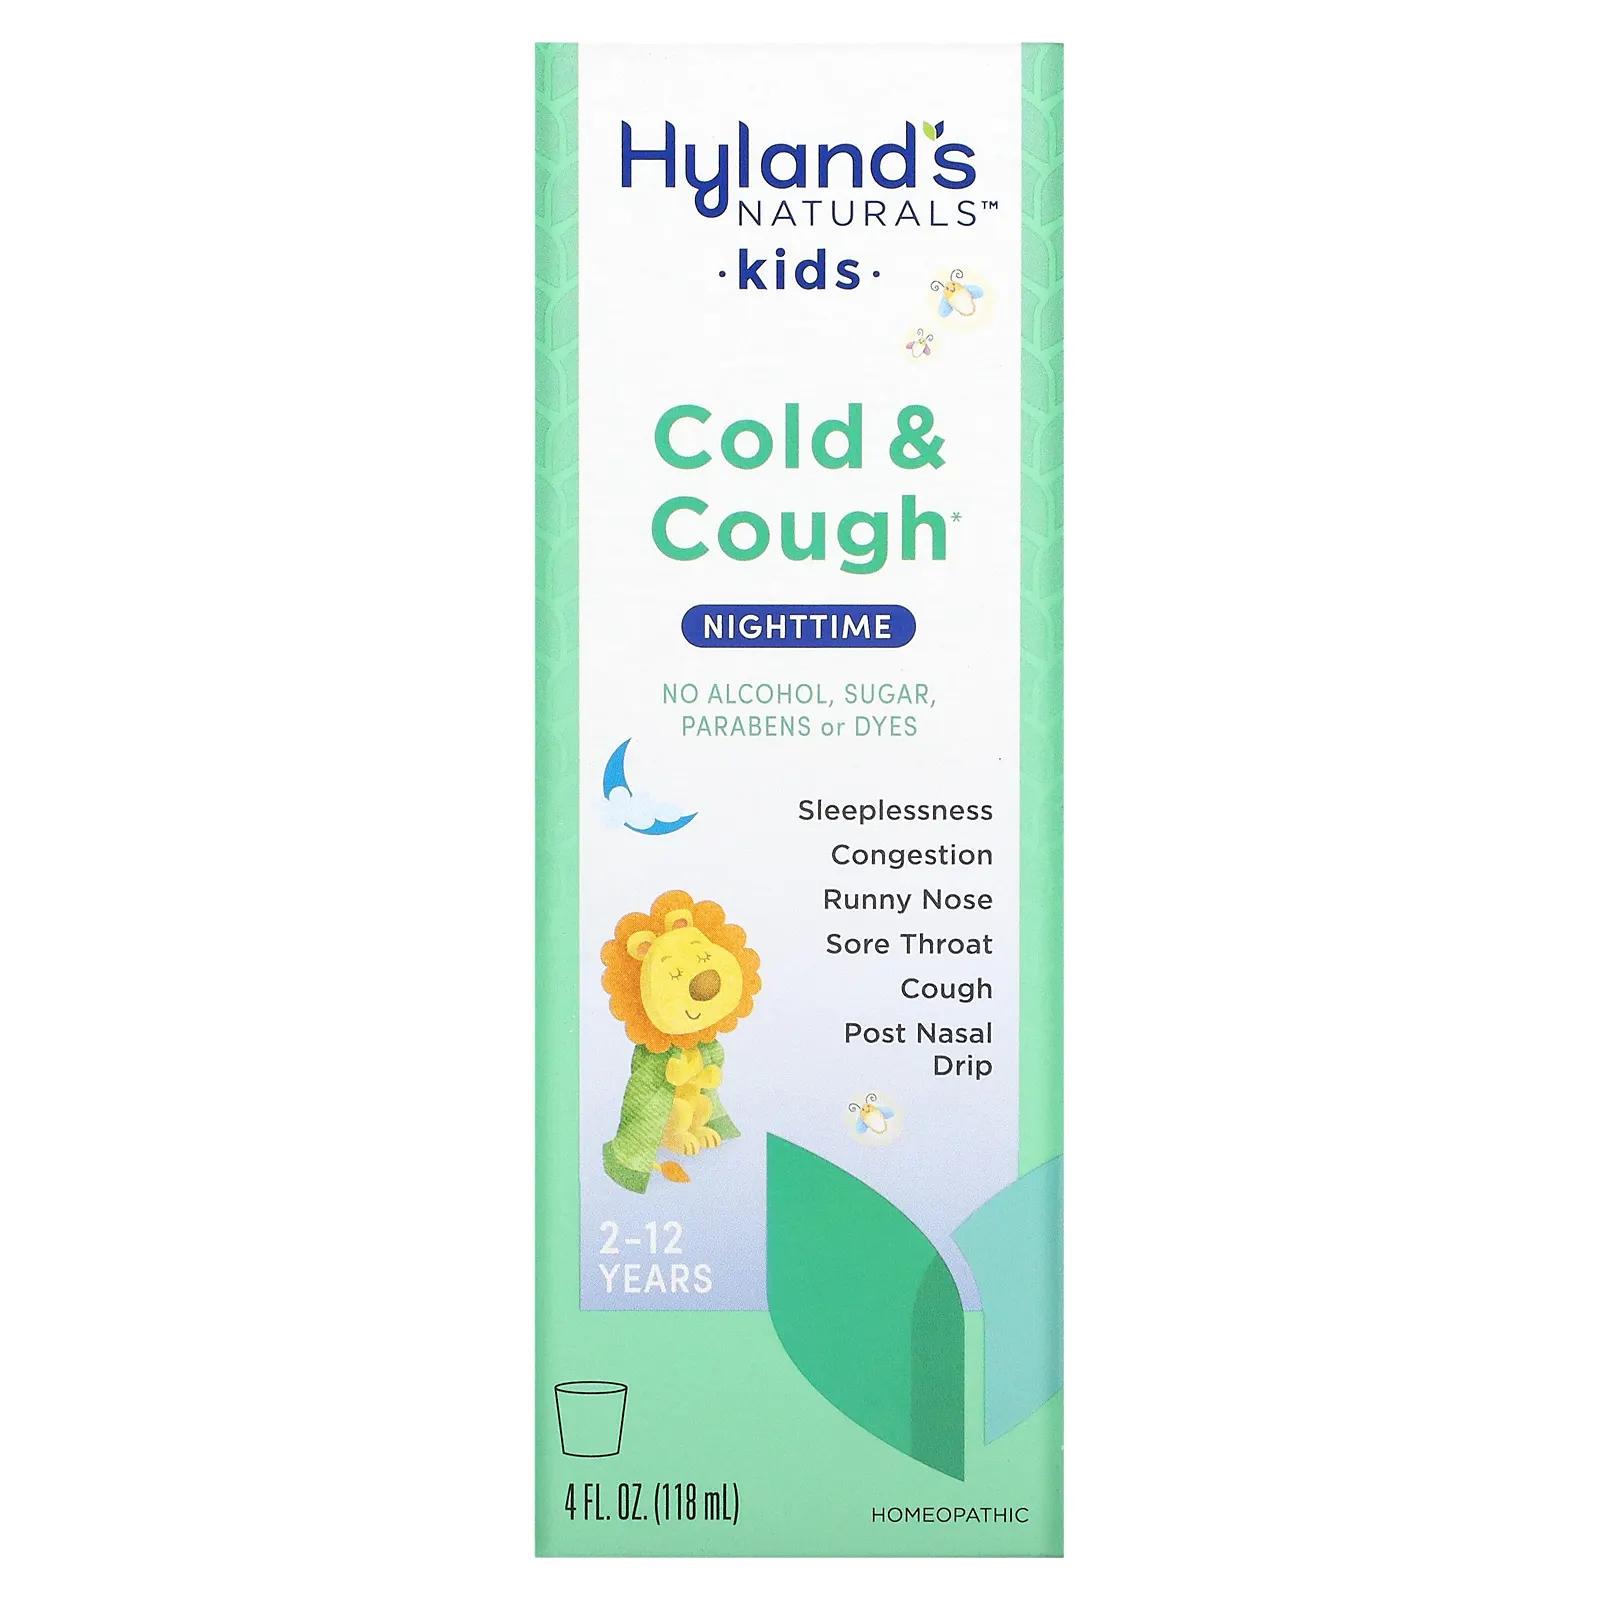 Hyland's Naturals 4 Kids Cold 'n Cough Nighttime Ages 2-12 4 fl oz (118 ml) beekeeper s naturals b soothed cough syrup 4 fl oz 118 ml